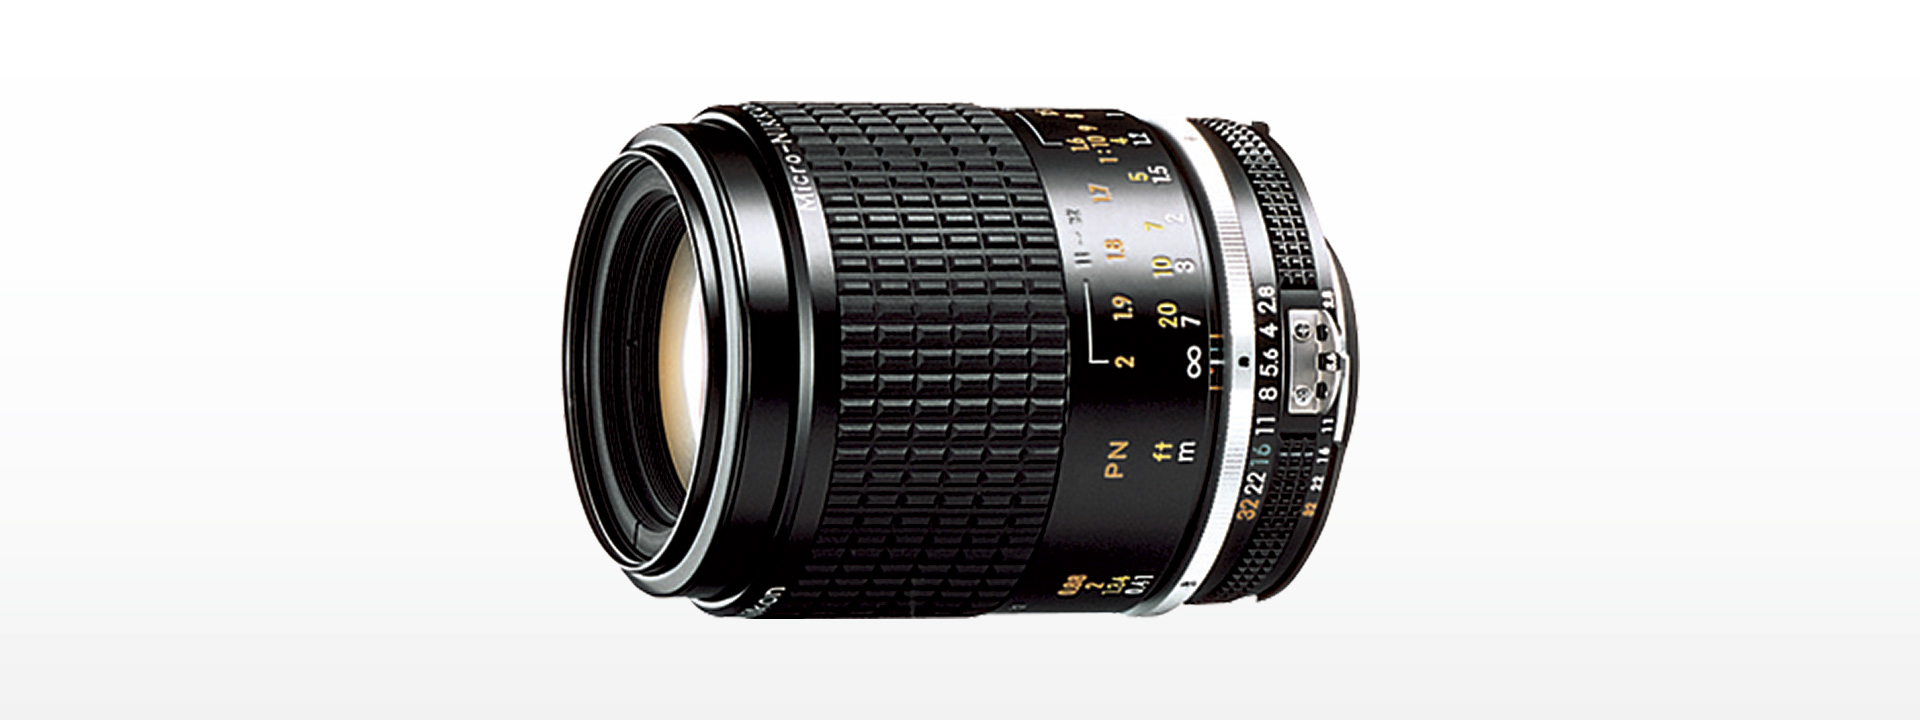 AI Micro-Nikkor 105mm f/2.8S - 概要 | NIKKORレンズ | ニコン ...